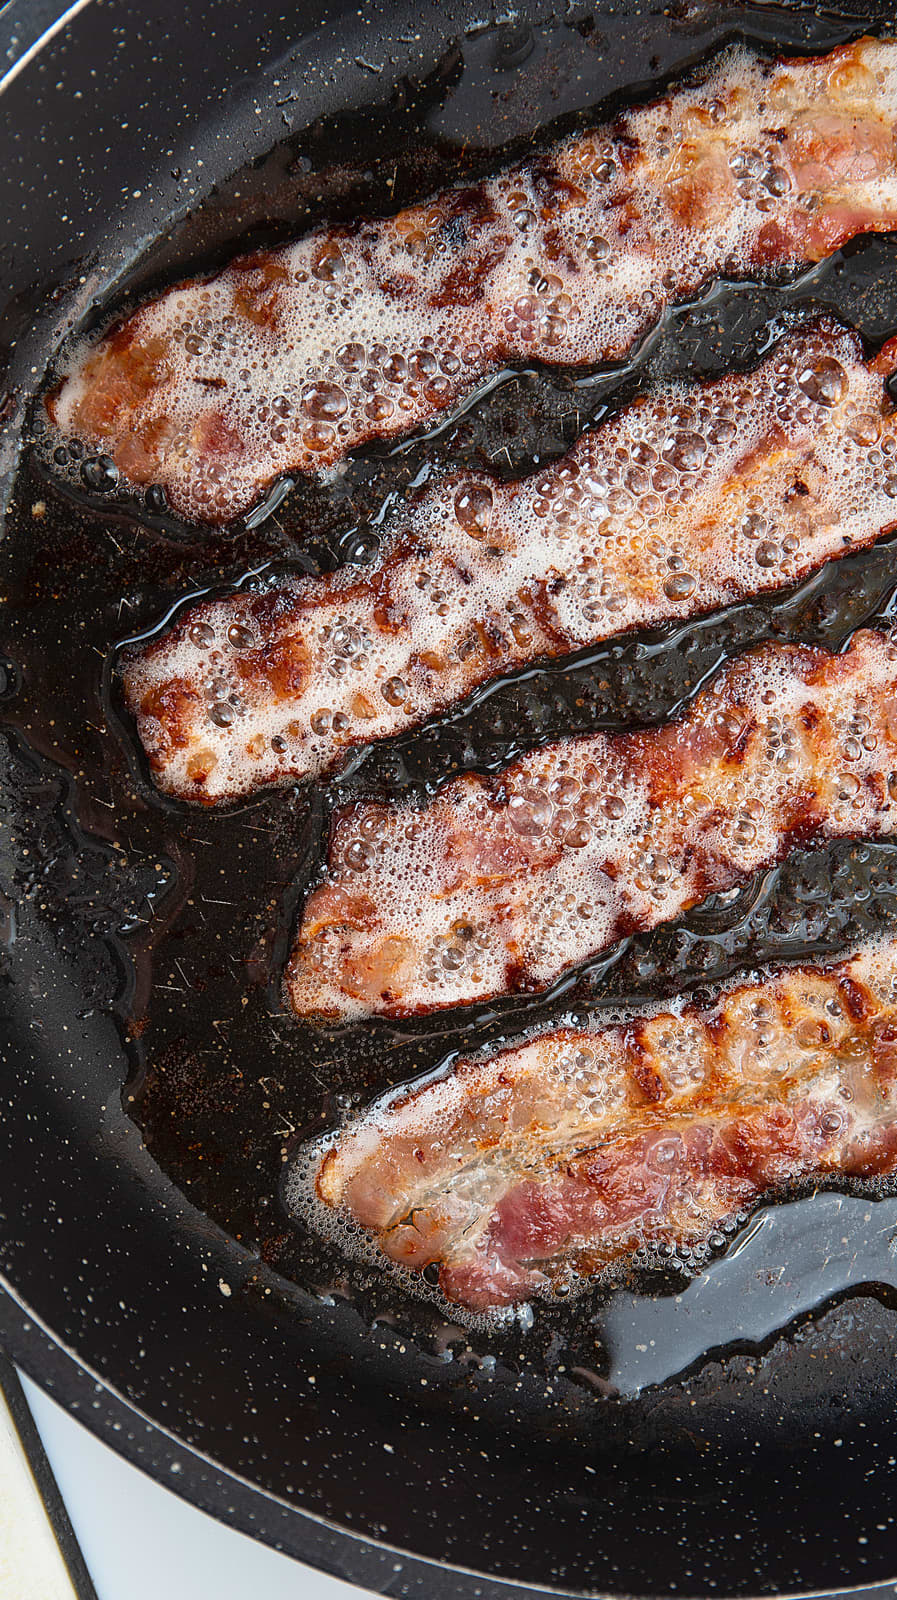 Bacon being cooked in grease